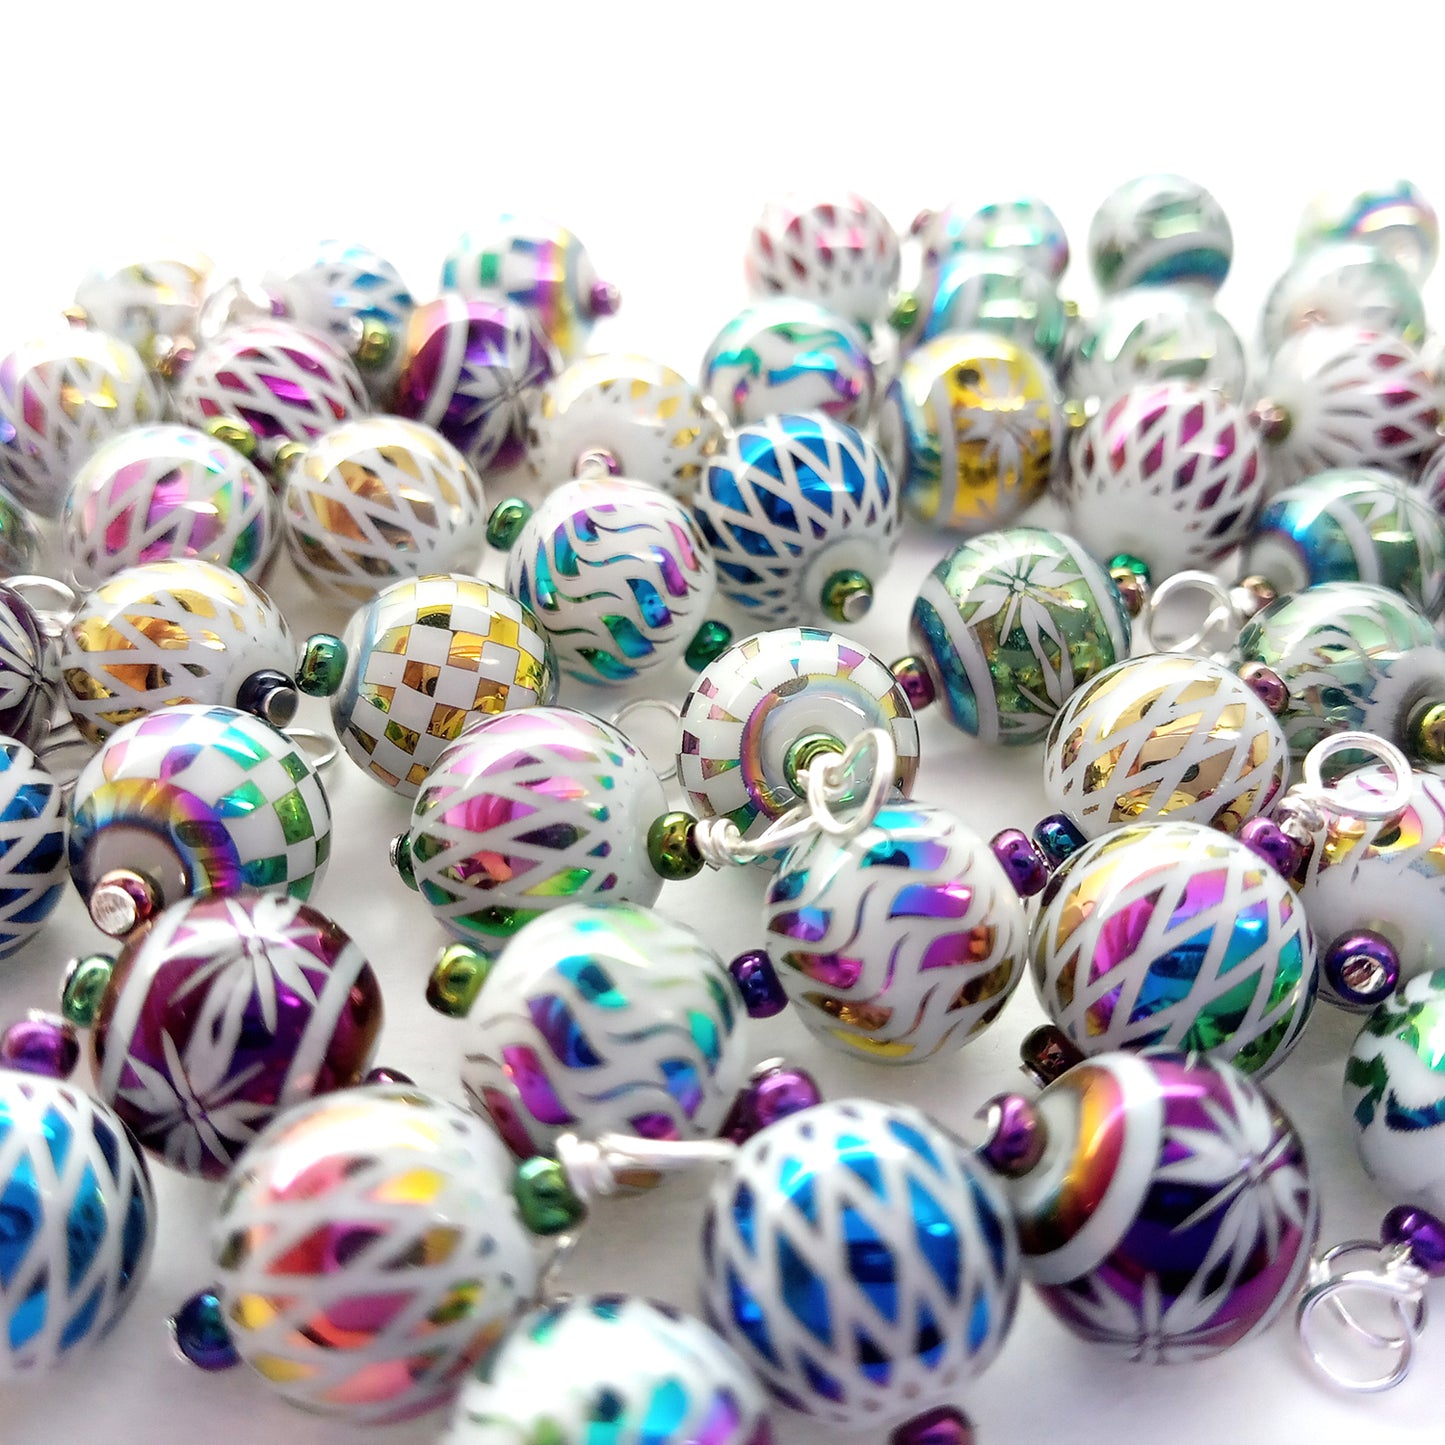 20 Tiny Christmas Ornaments, Glass Bauble Mix for 1:12 Scale or Dollhouse Trees